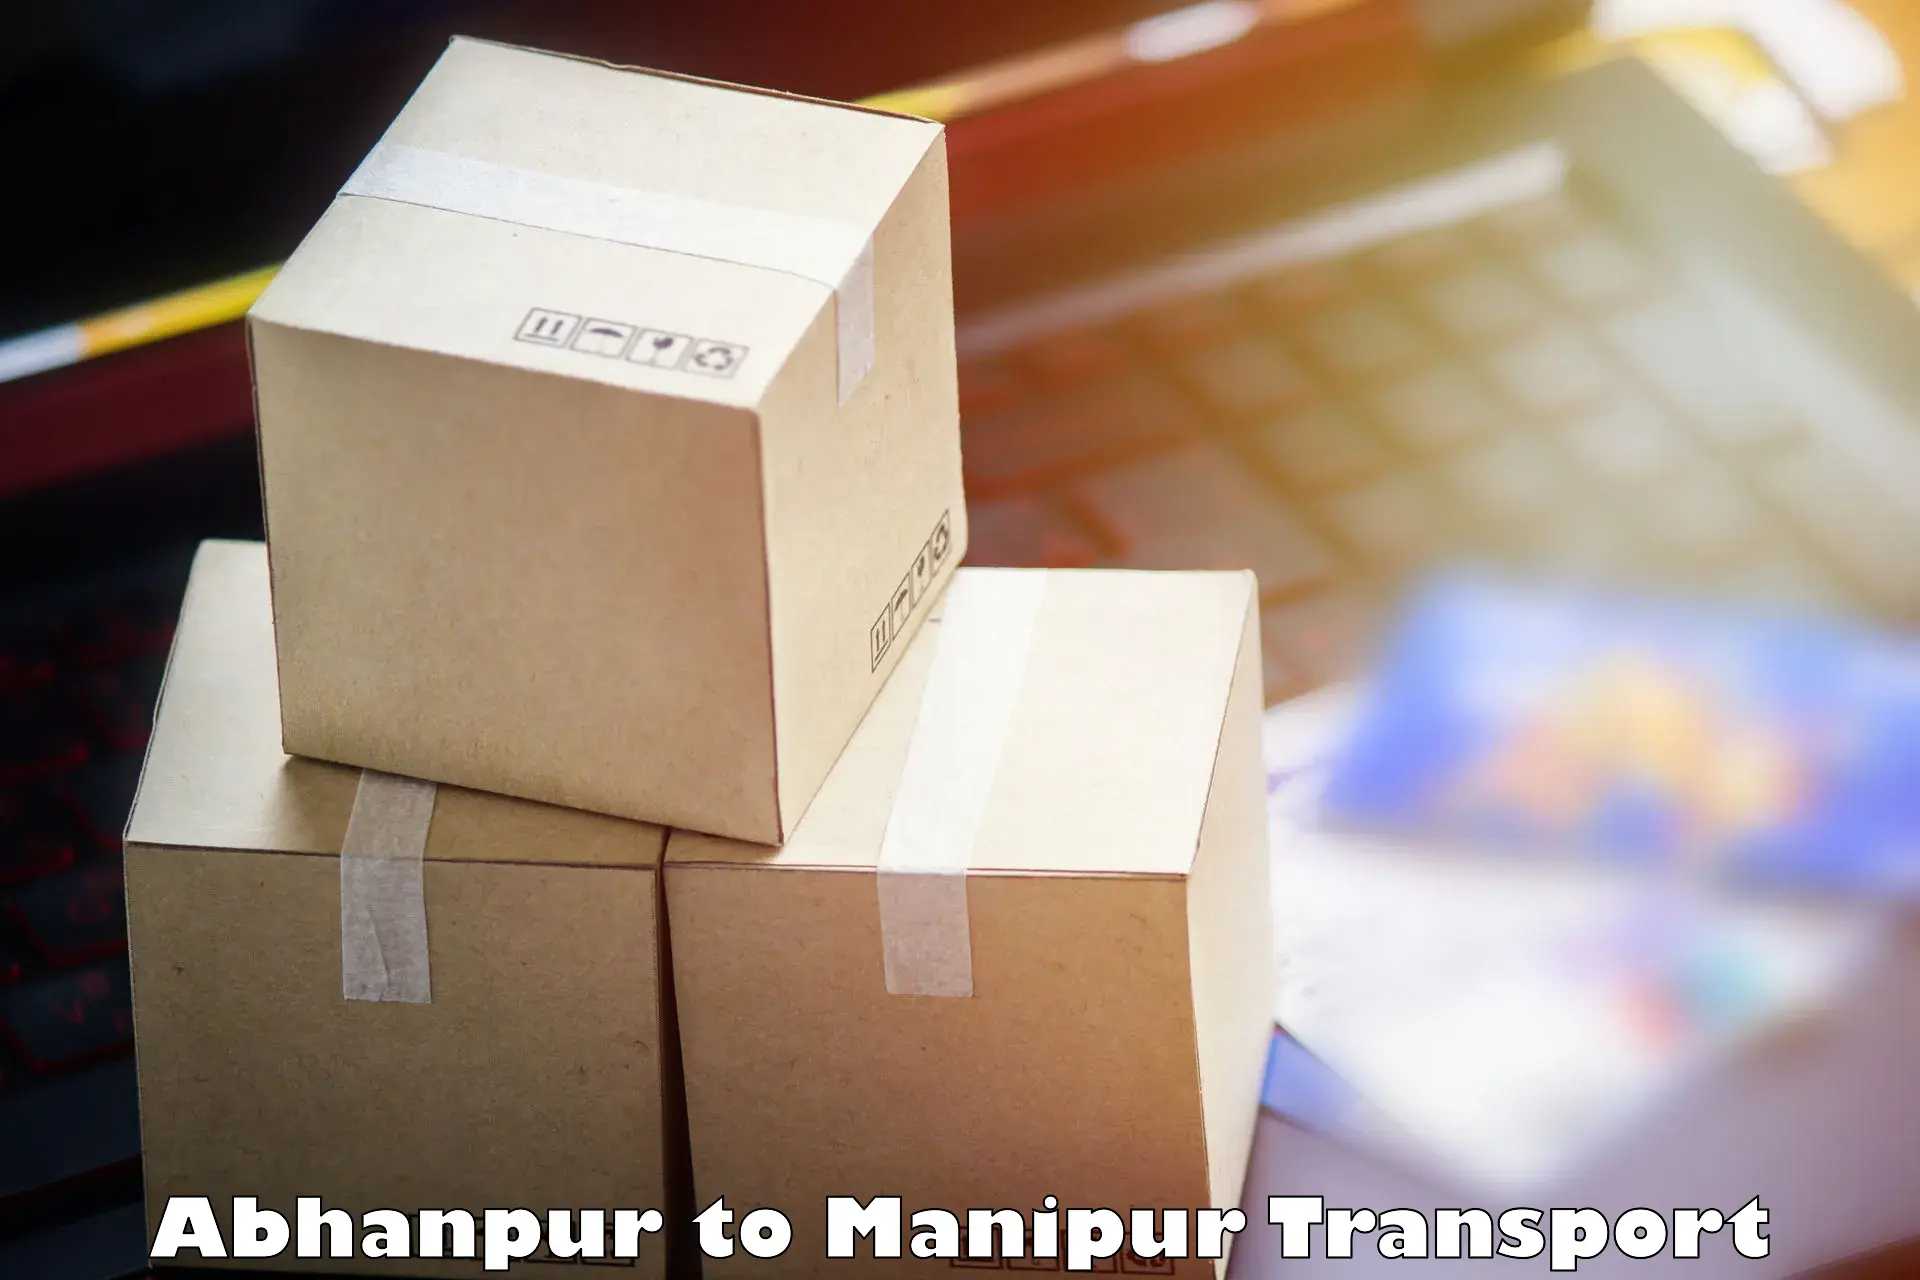 Goods delivery service Abhanpur to Imphal